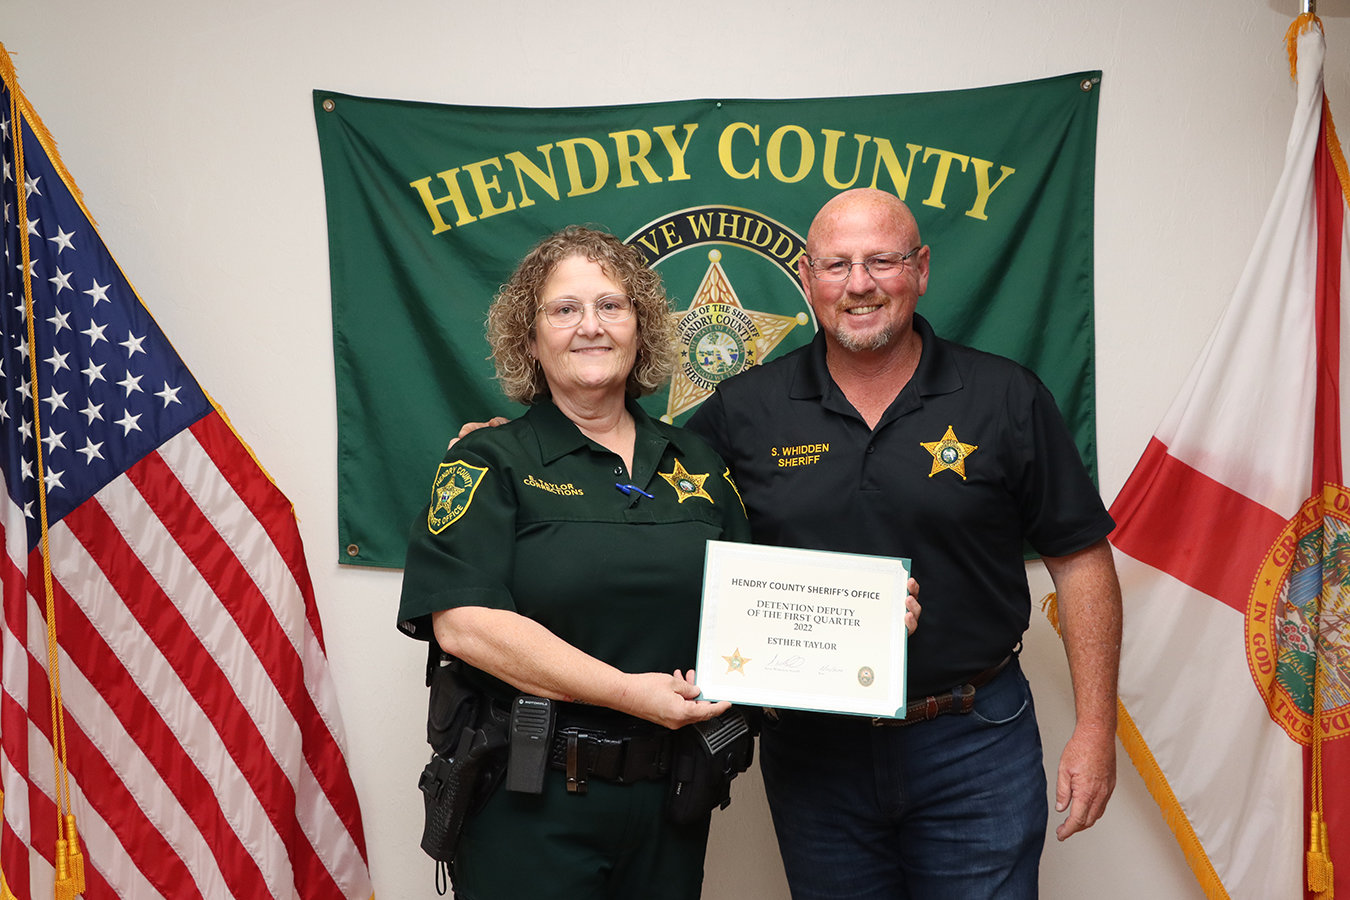 On  Aug. 24, 2022, Hendry County Sheriff Steven Whidden presented Corrections Officer Esther Taylor with the Correction Officer of the First Quarter Award. C/O Taylor has been employed with the Hendry County Sheriff’s Office, Jail Division since February of 2012. C/O Taylor has gone above and beyond her duties in various capacities. During the months of November and December 2021, C/O Taylor assumed the Acting Sergeant position during her shift, “C/O Taylor Supervised her shift without issues”.